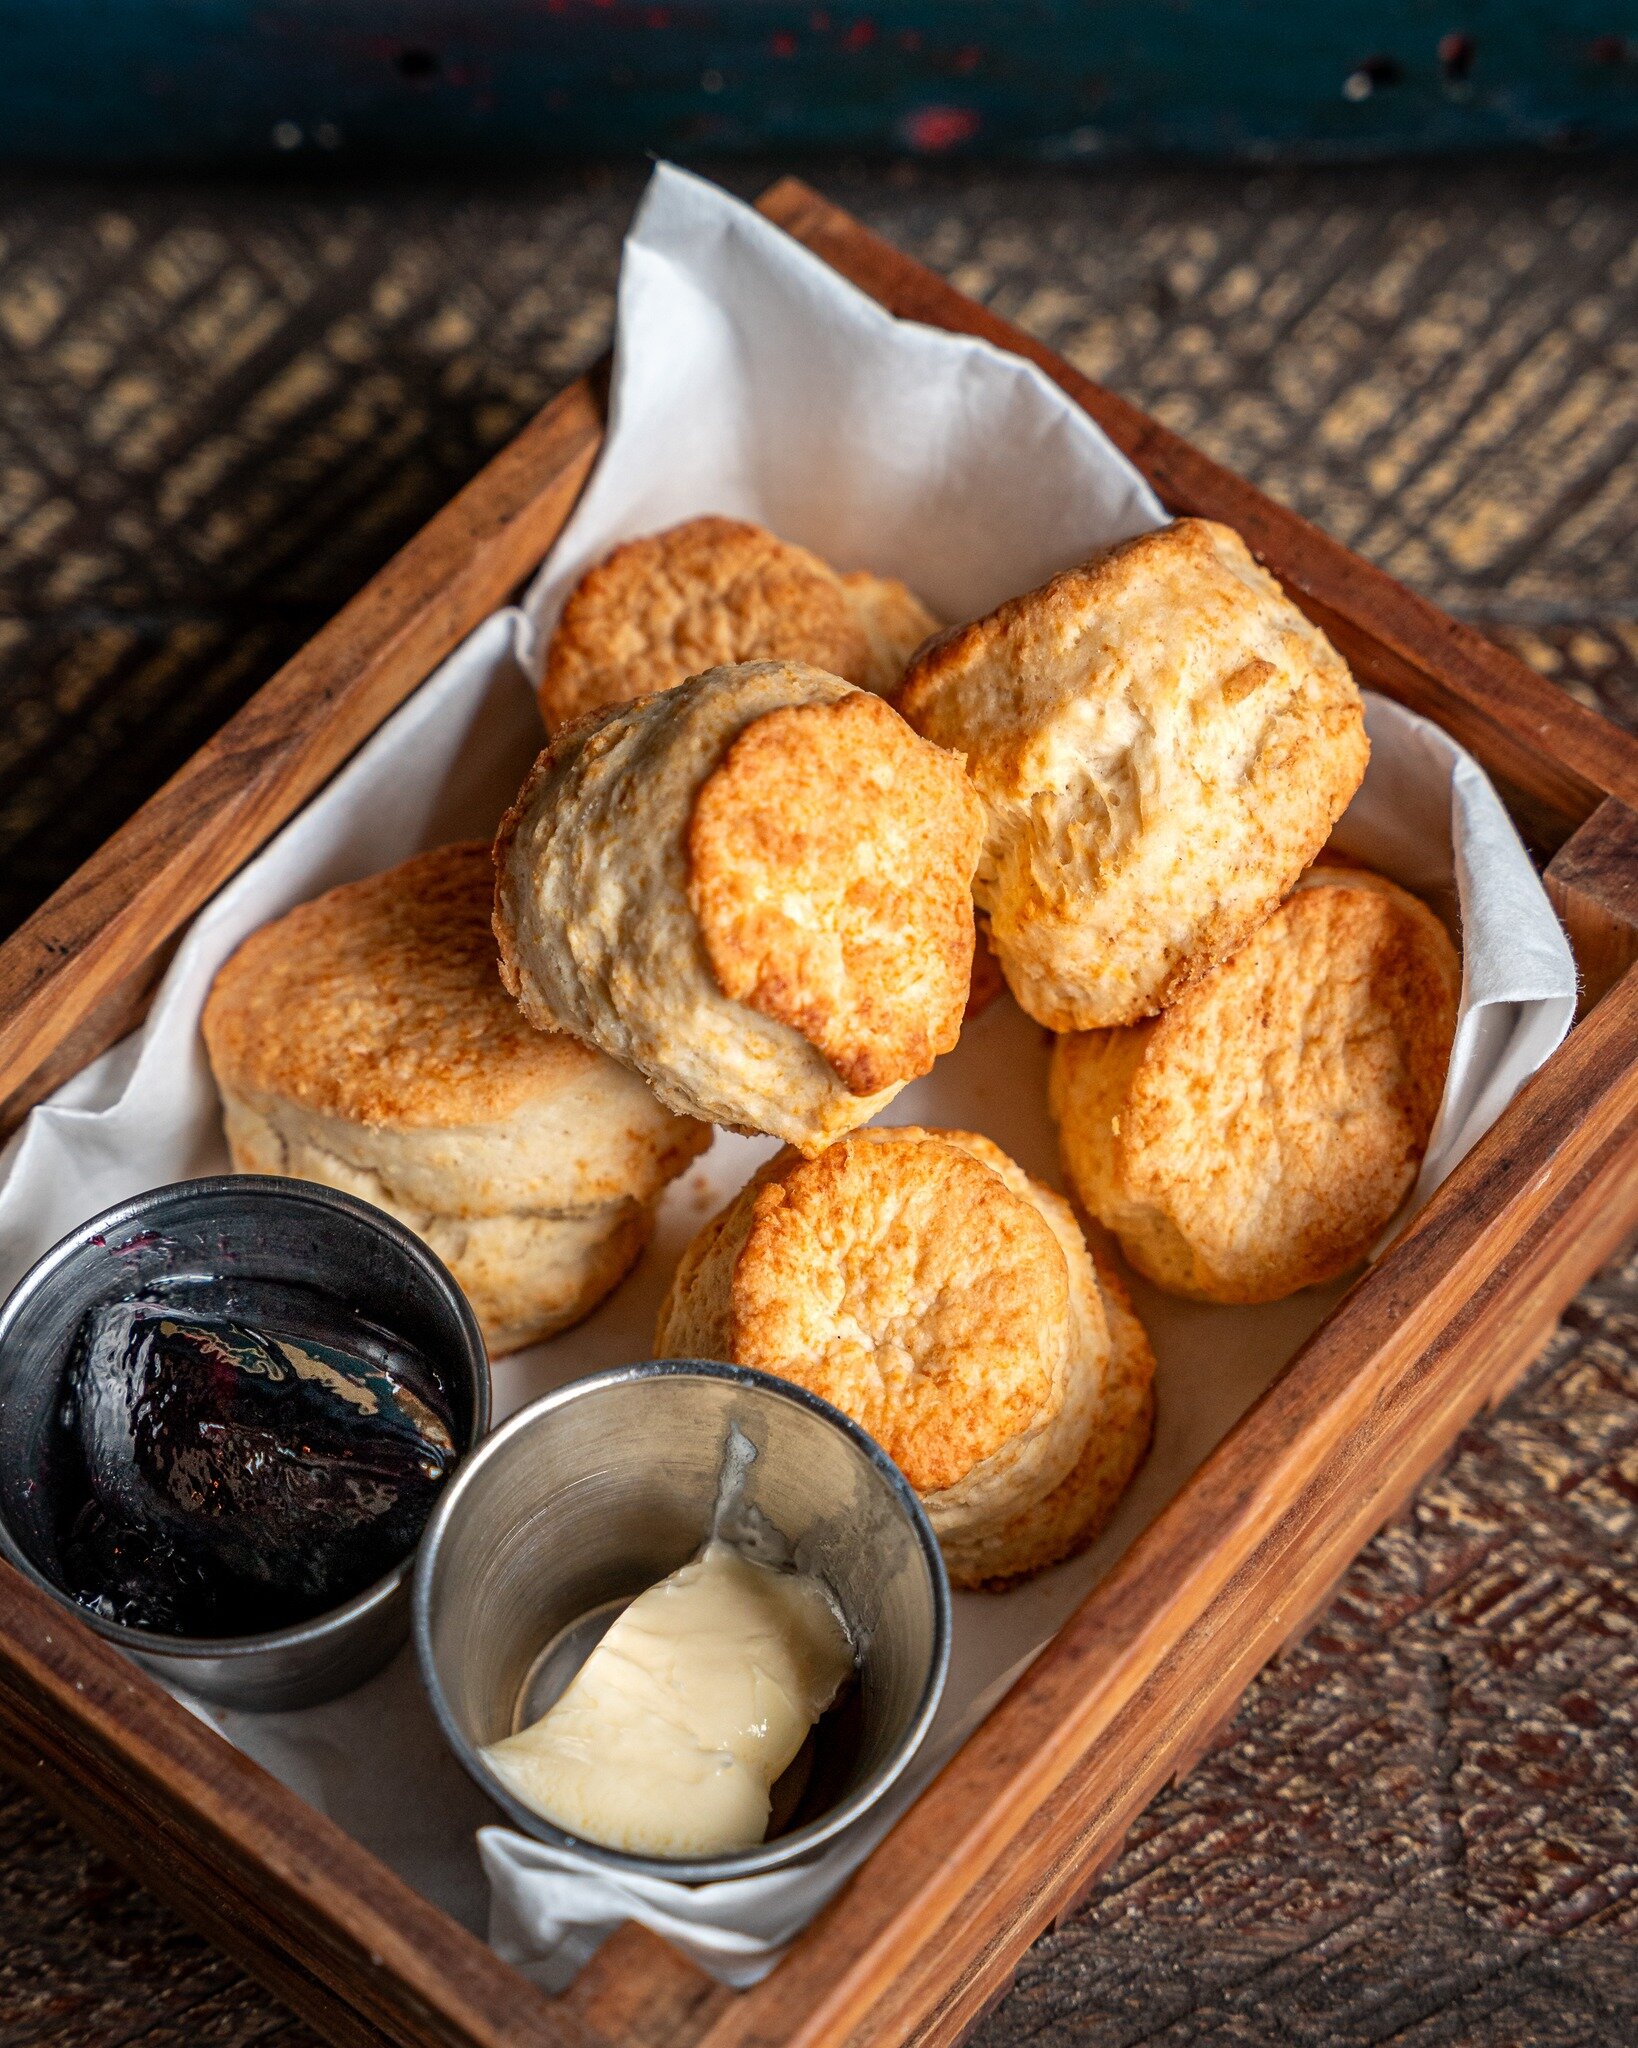 See you tomorrow for Sunday Brunch! When you visit us, make sure to add a Basket of Biscuits to your order. You won't regret it. House-made with a lot love.

Pictured: Basket of Biscuits
6 mini house biscuits served with jam &amp; butter.

See you to